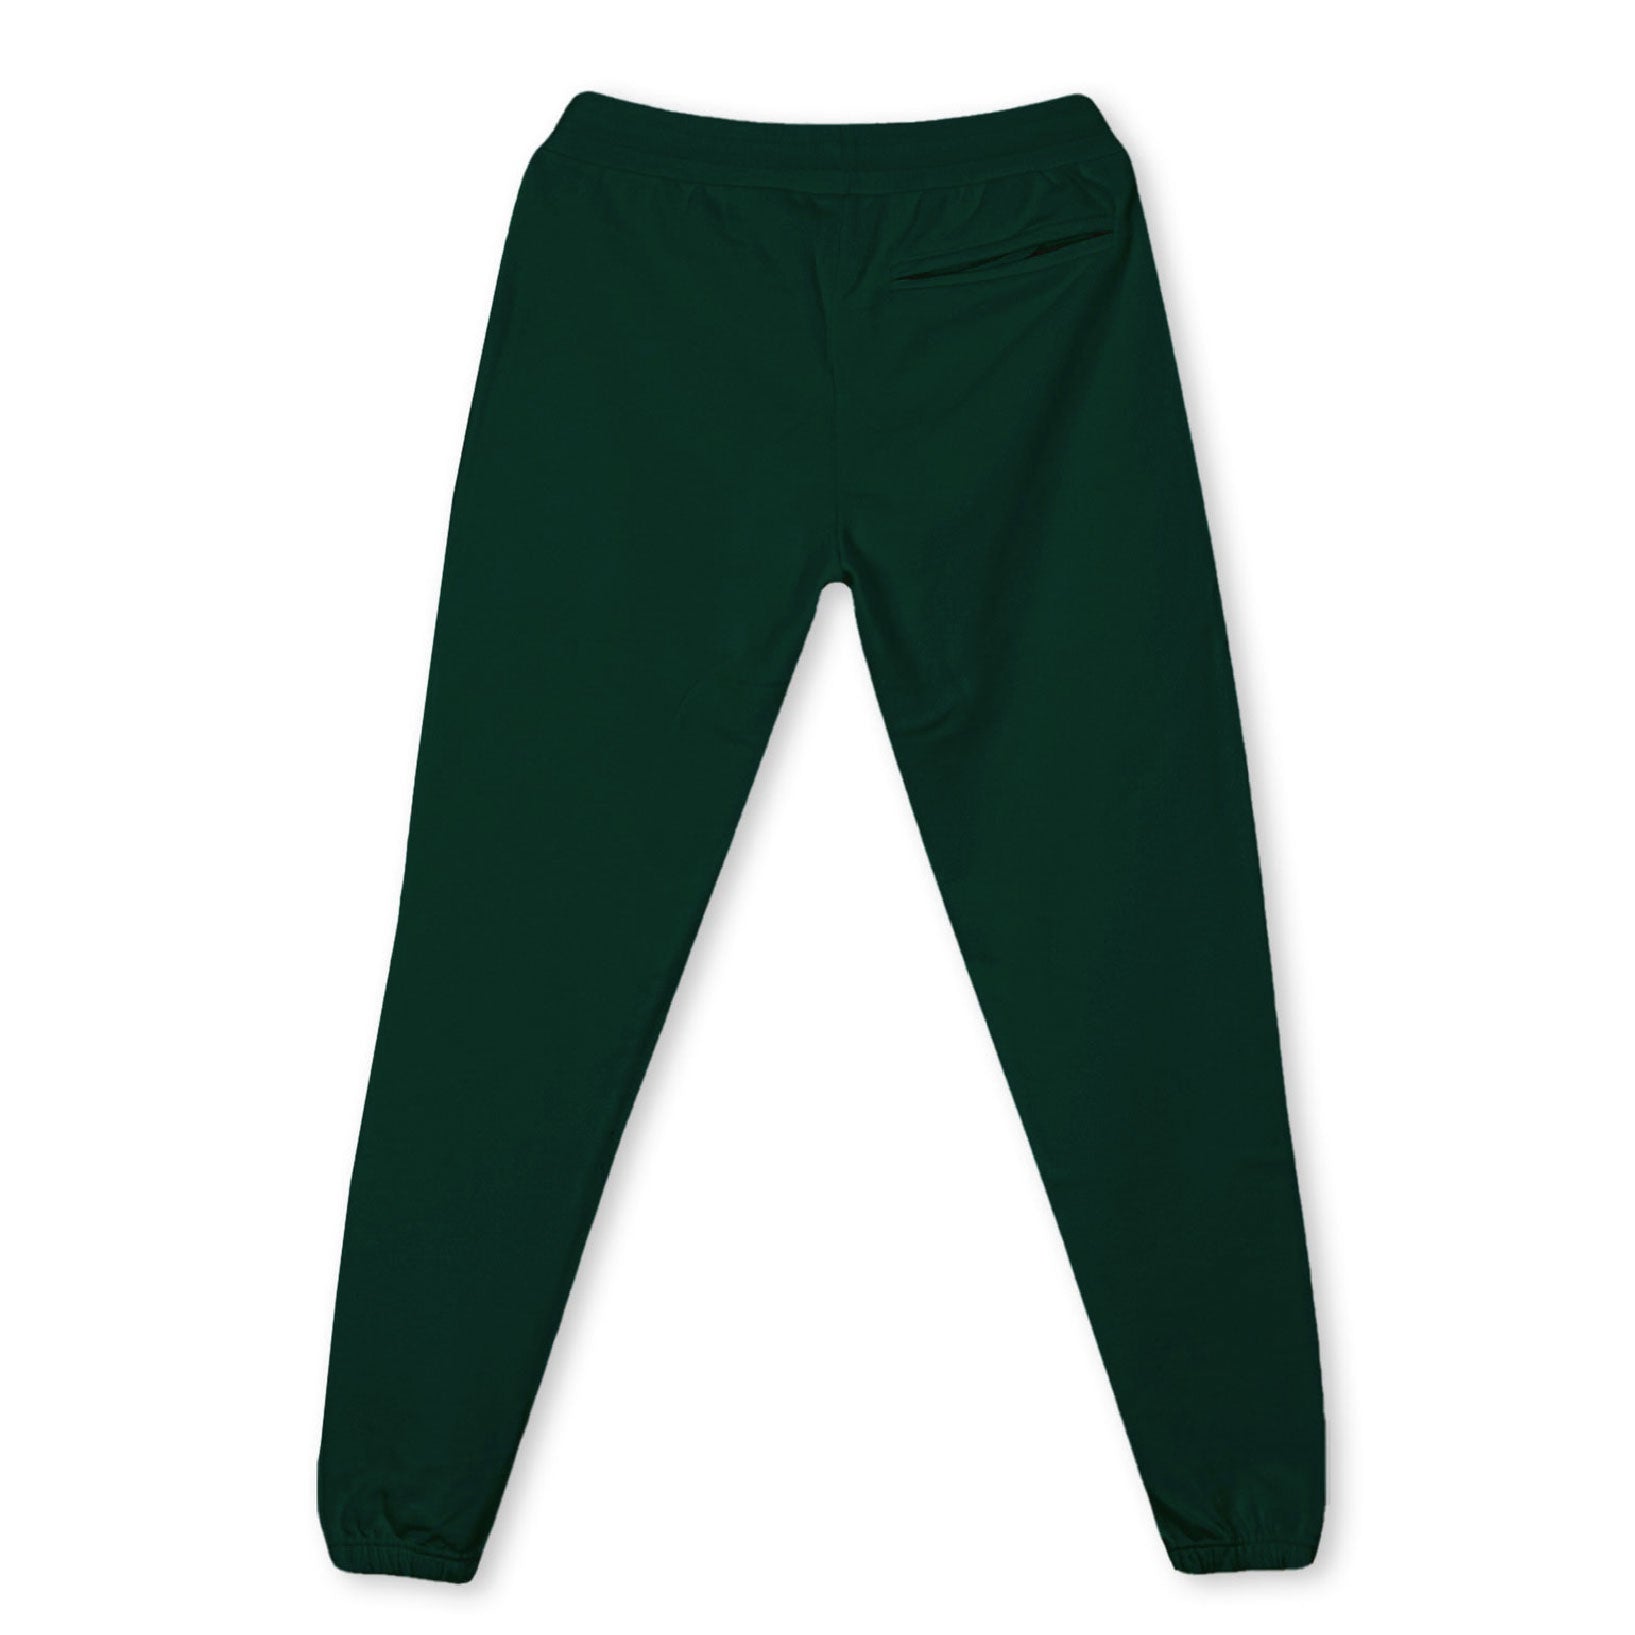 ESTATE OF MIND FRENCH TERRY SWEATPANTS - VICTORY - WILD GREEN